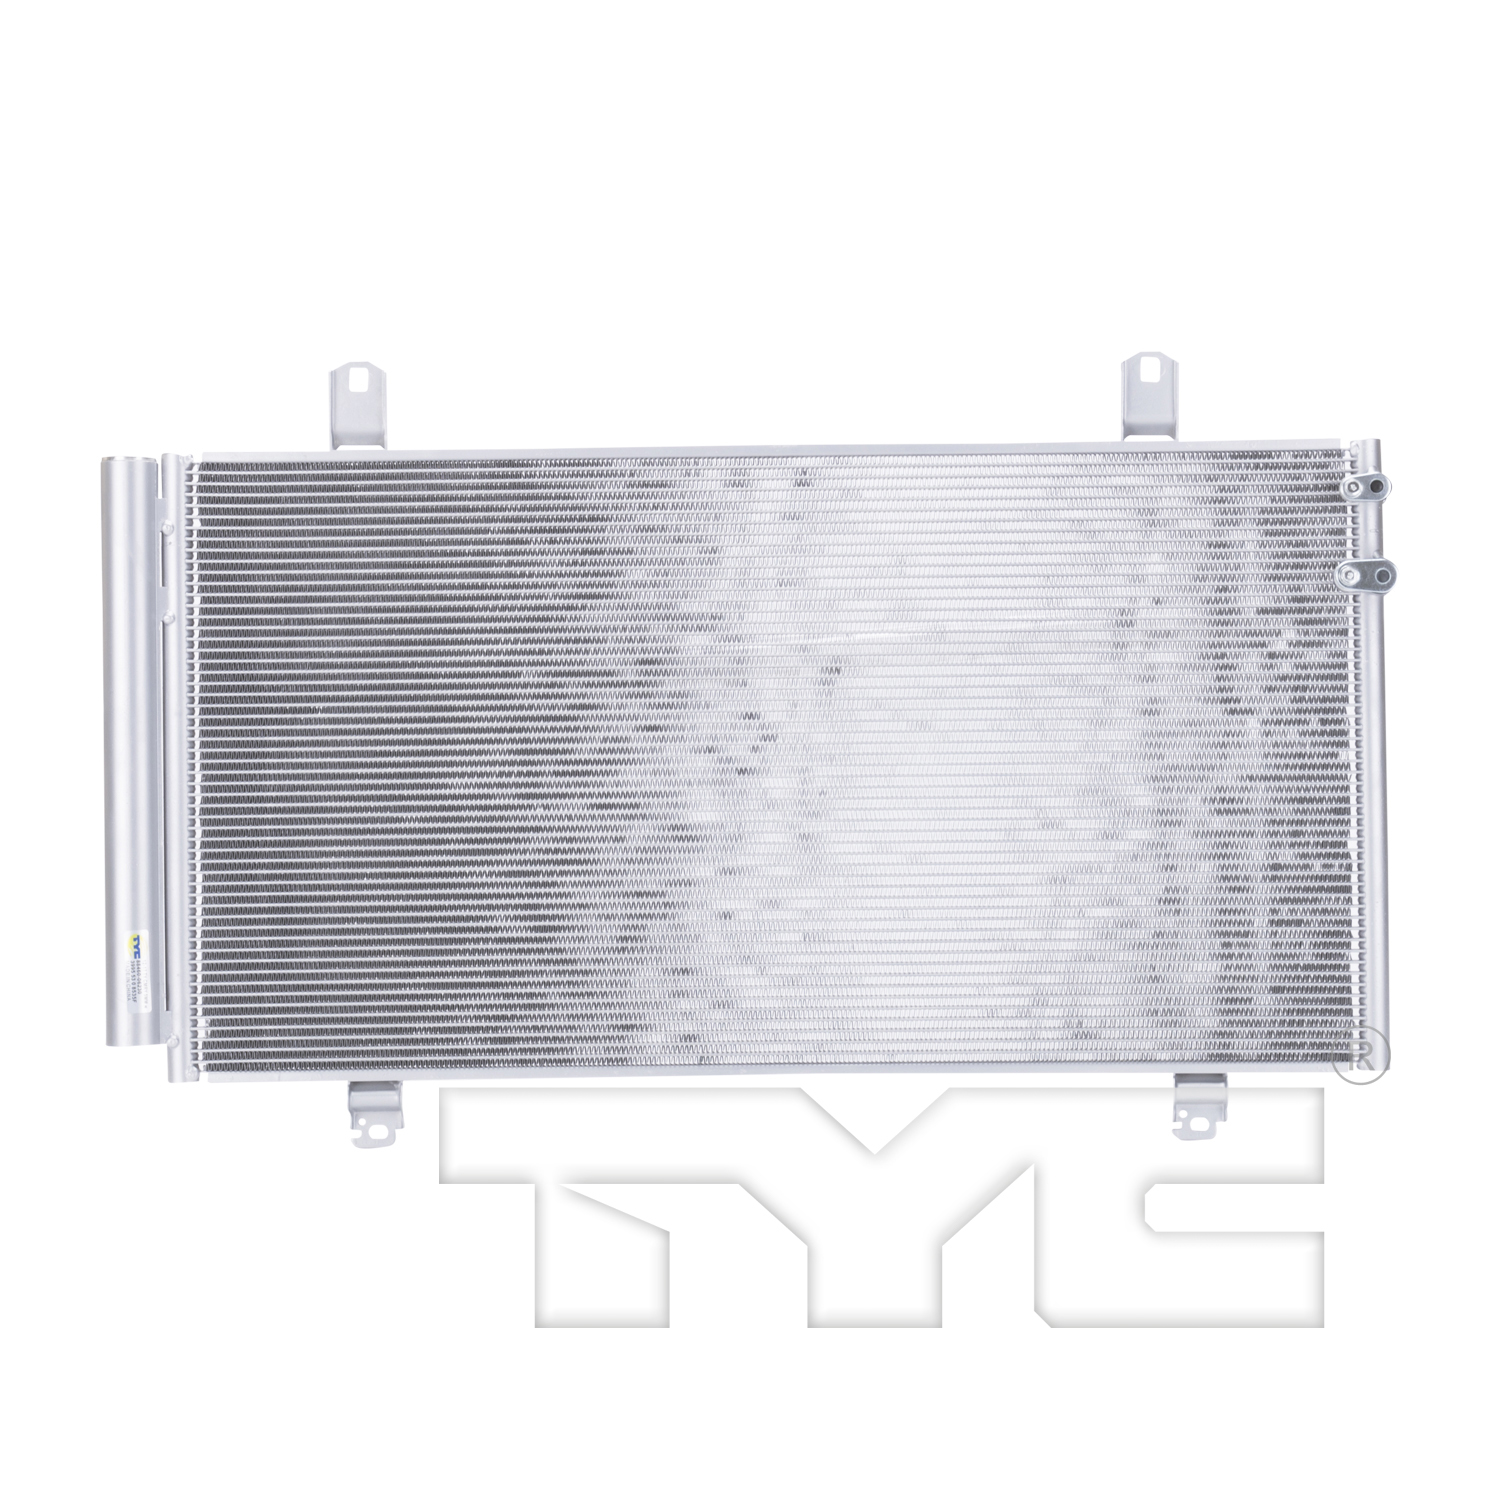 Aftermarket AC CONDENSERS for TOYOTA - CAMRY, CAMRY,12-17,Air conditioning condenser